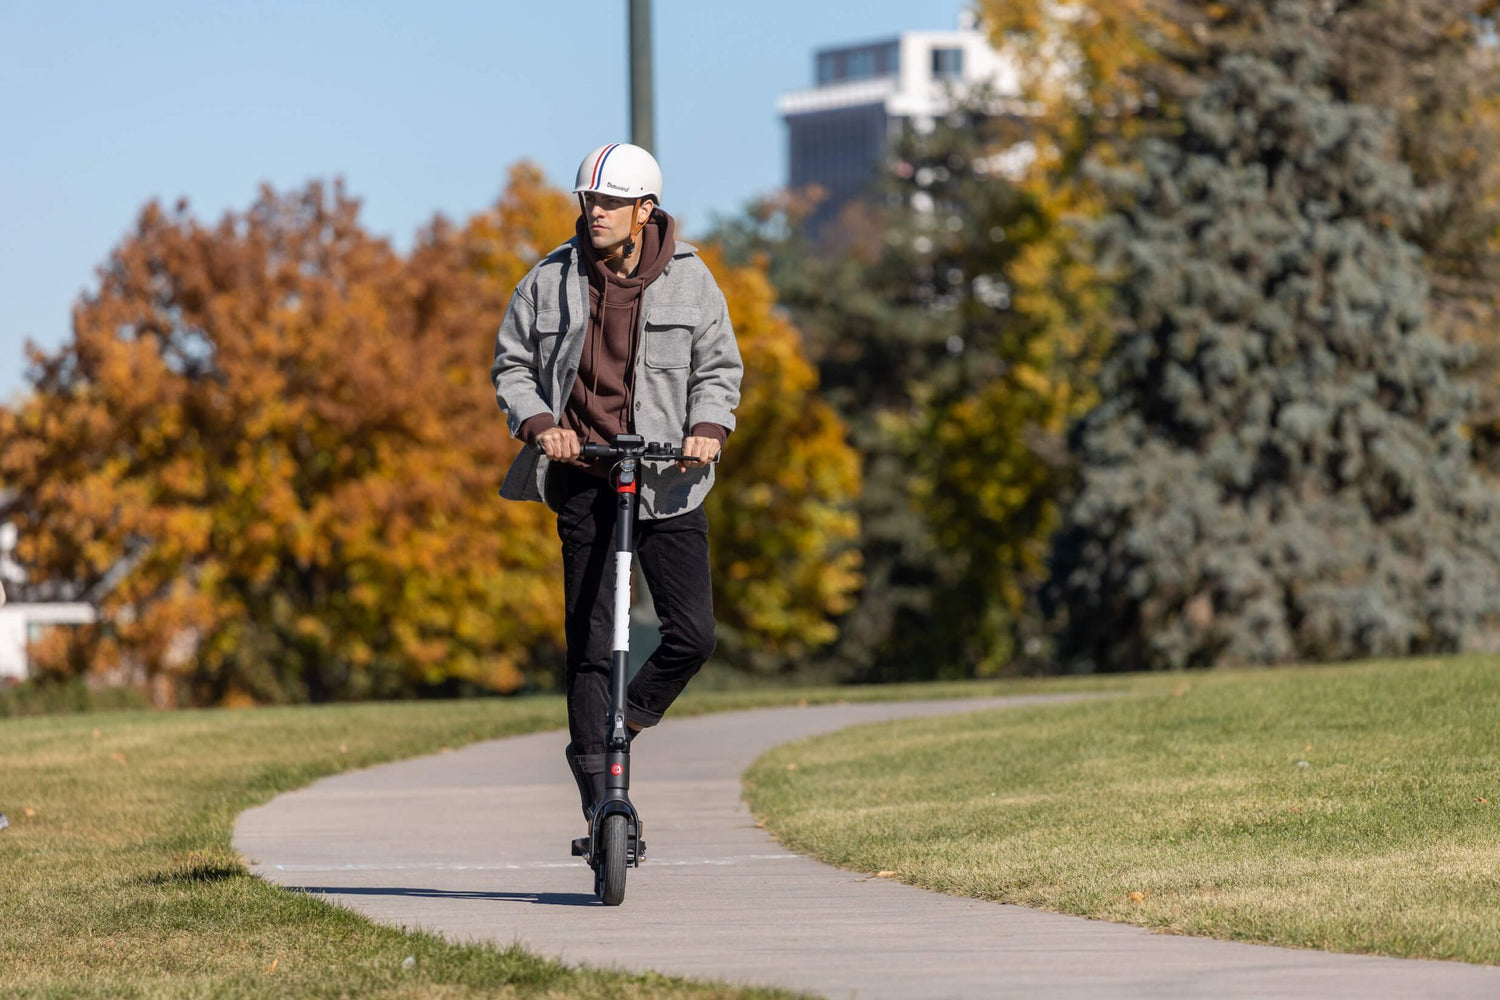 The Best Electric Scooters for College Commuting - GOTRAX